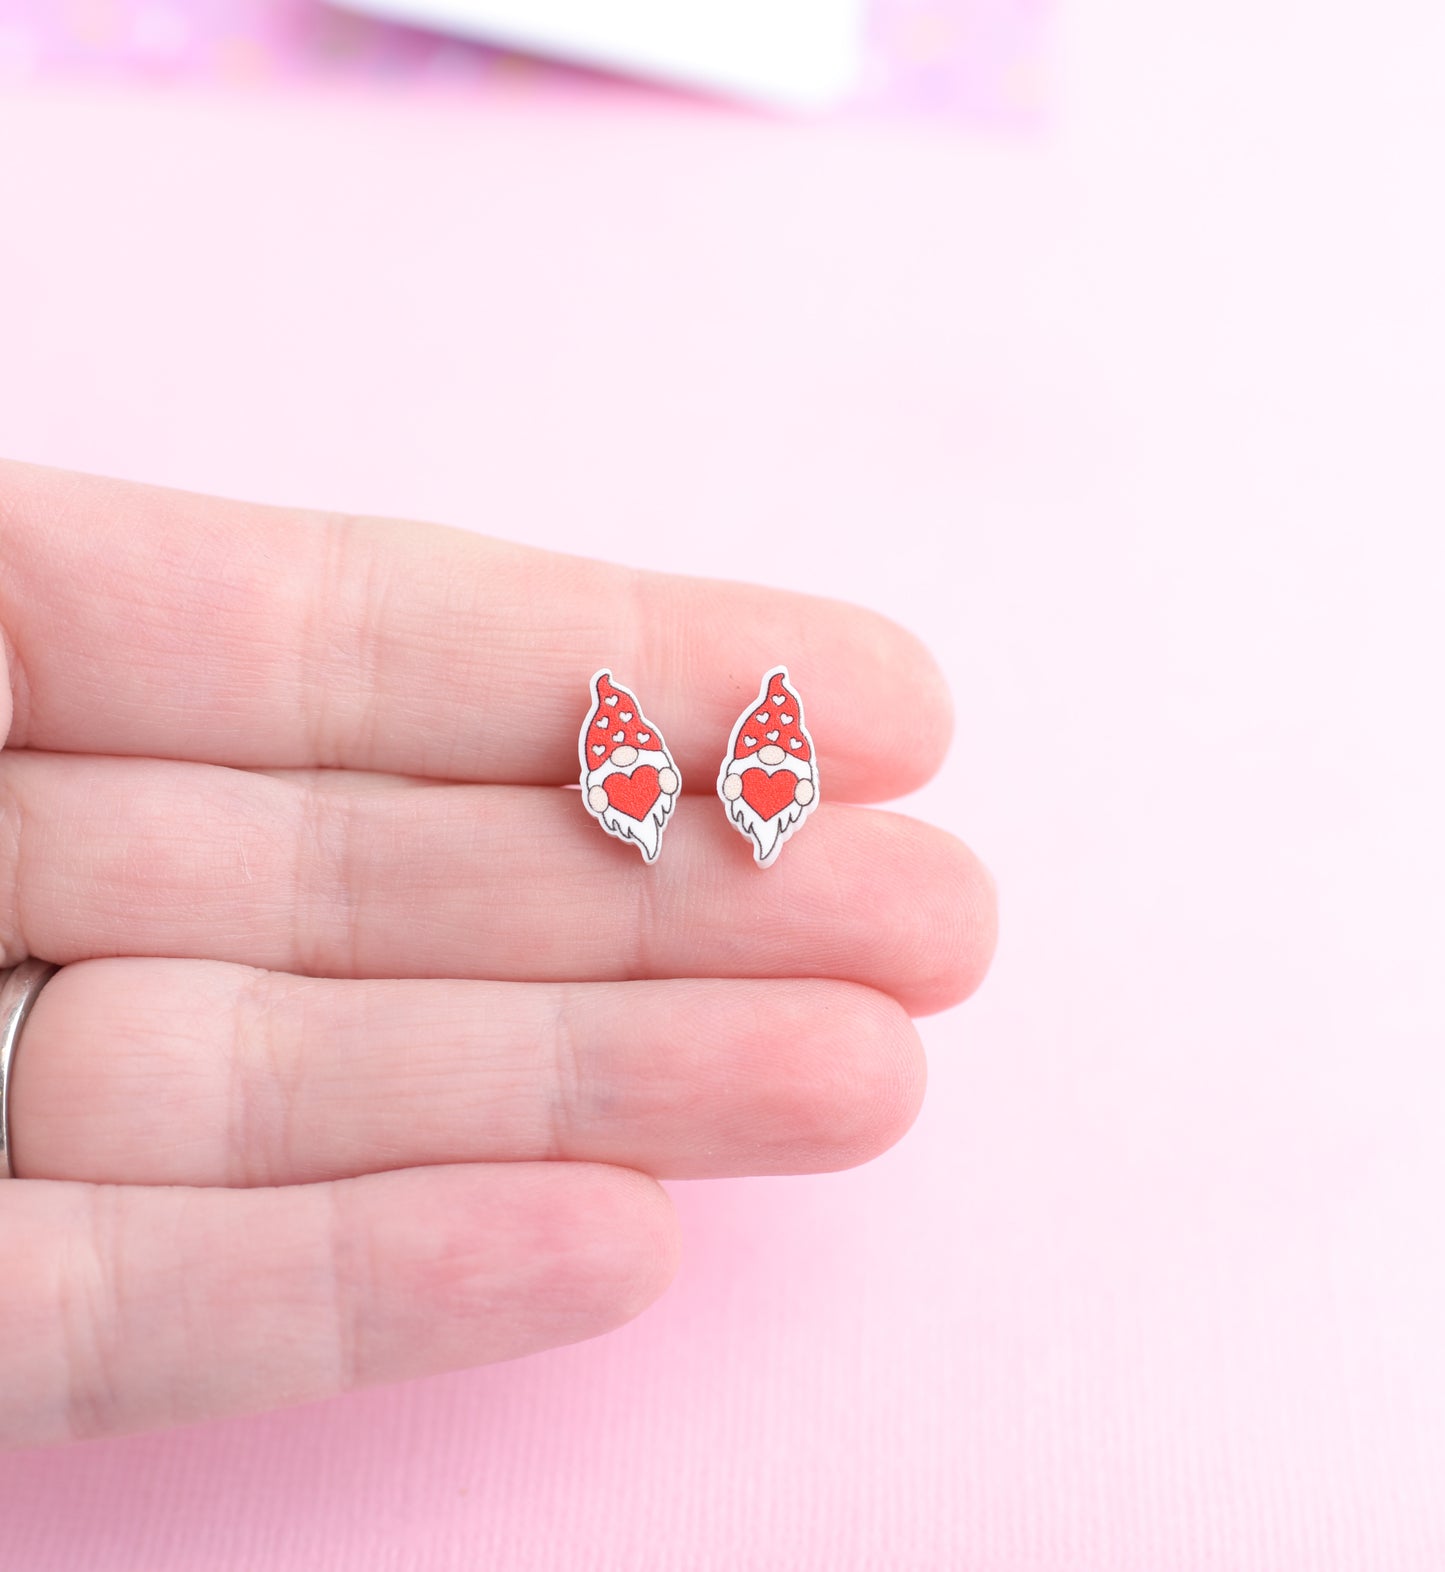 Love Gnome Heart Earrings with Titanium Posts